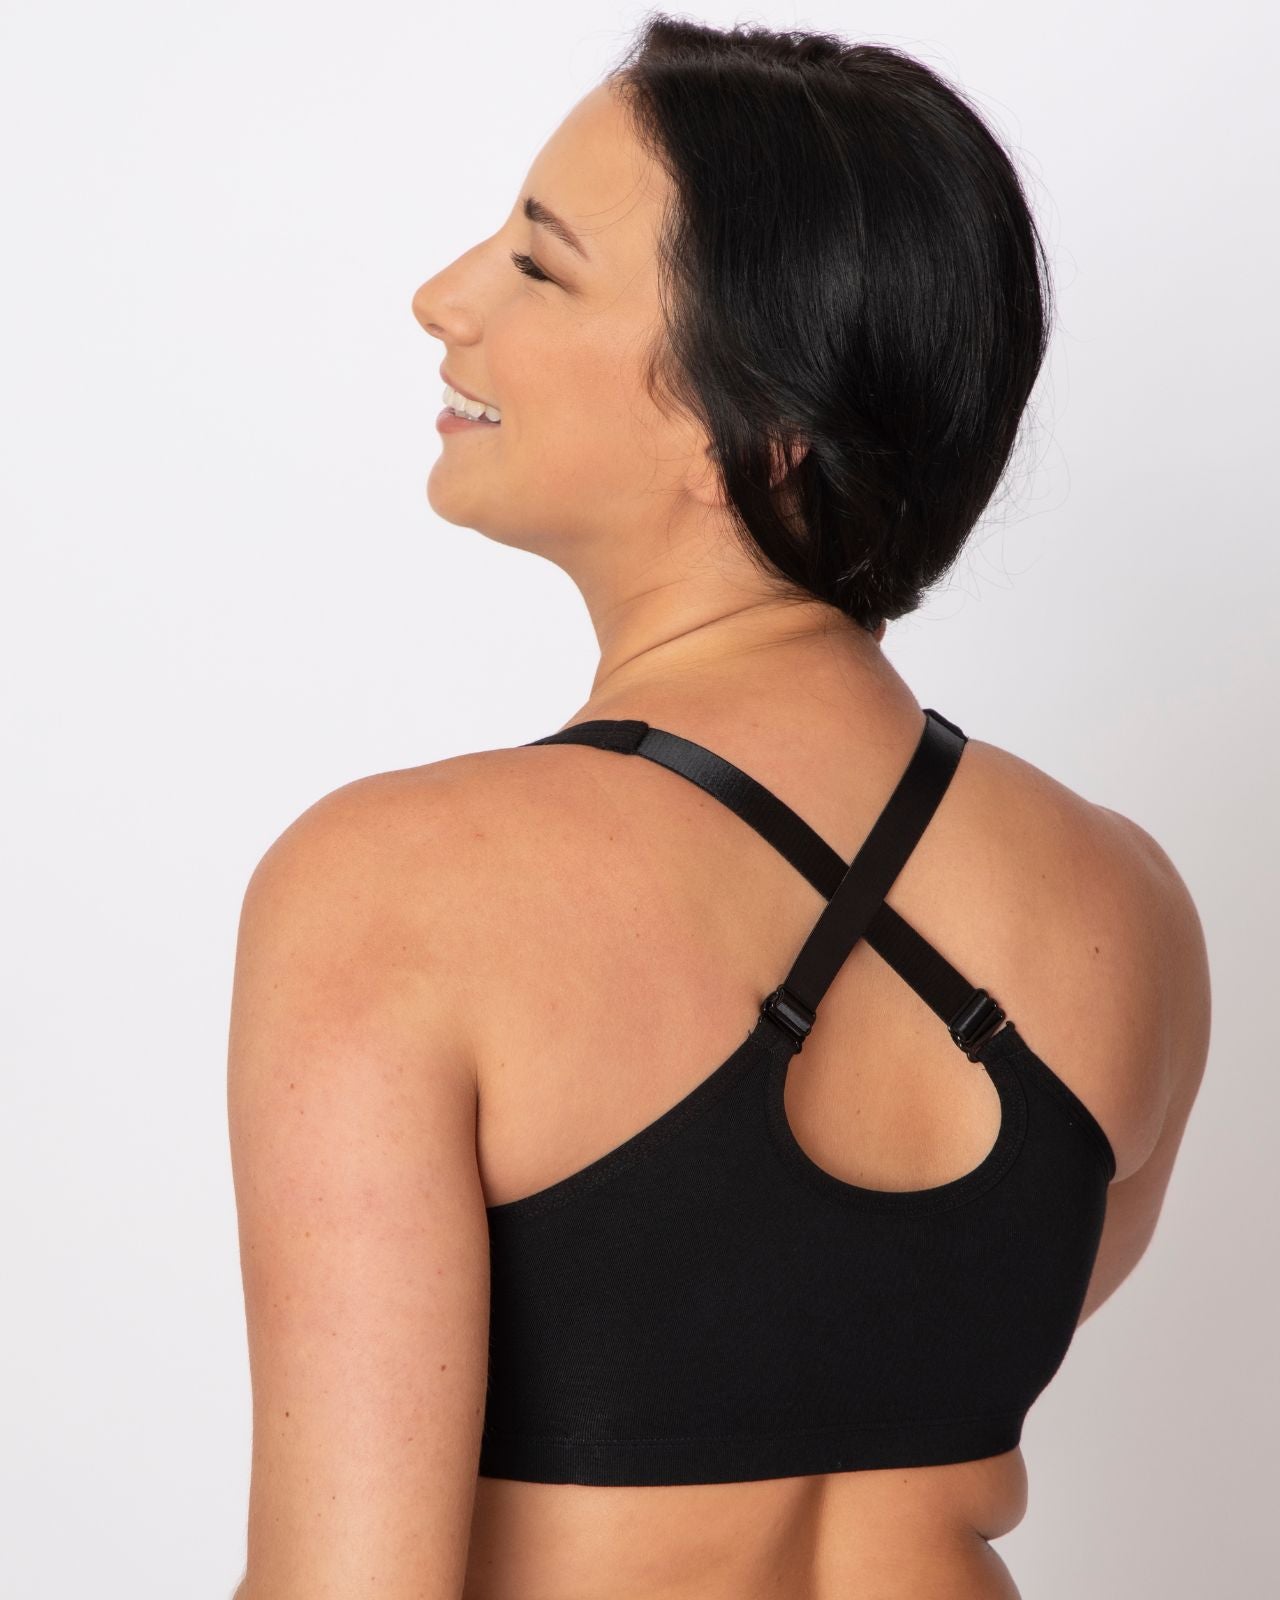 Lervanla Mastectomy Bras with Pockets for Prosthesis Front Closure